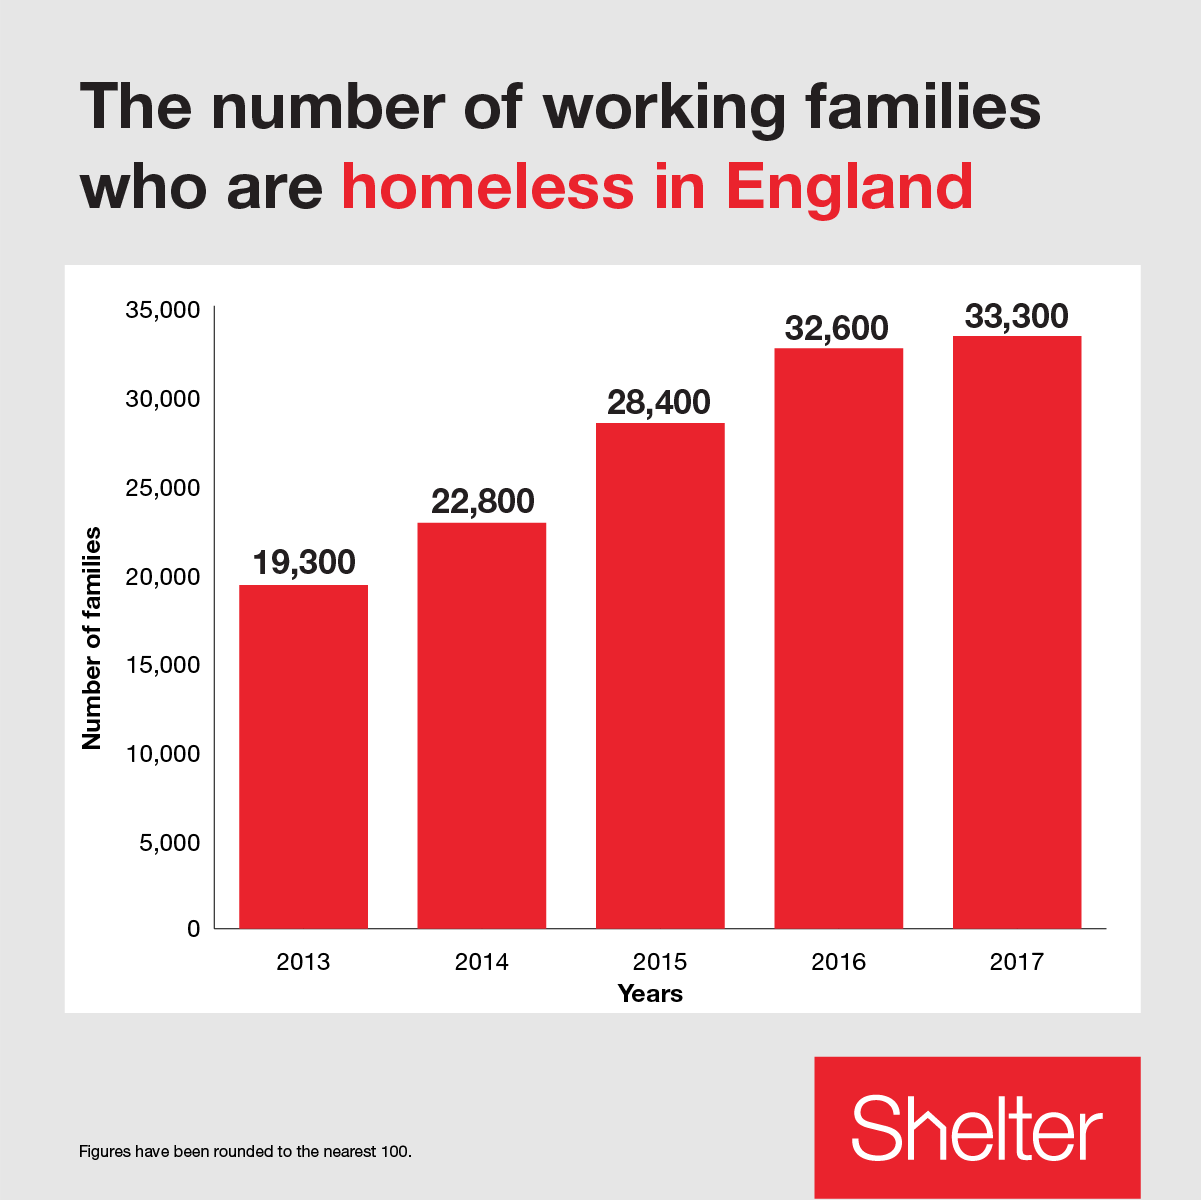 Over half of homeless families in England are in work, shock new